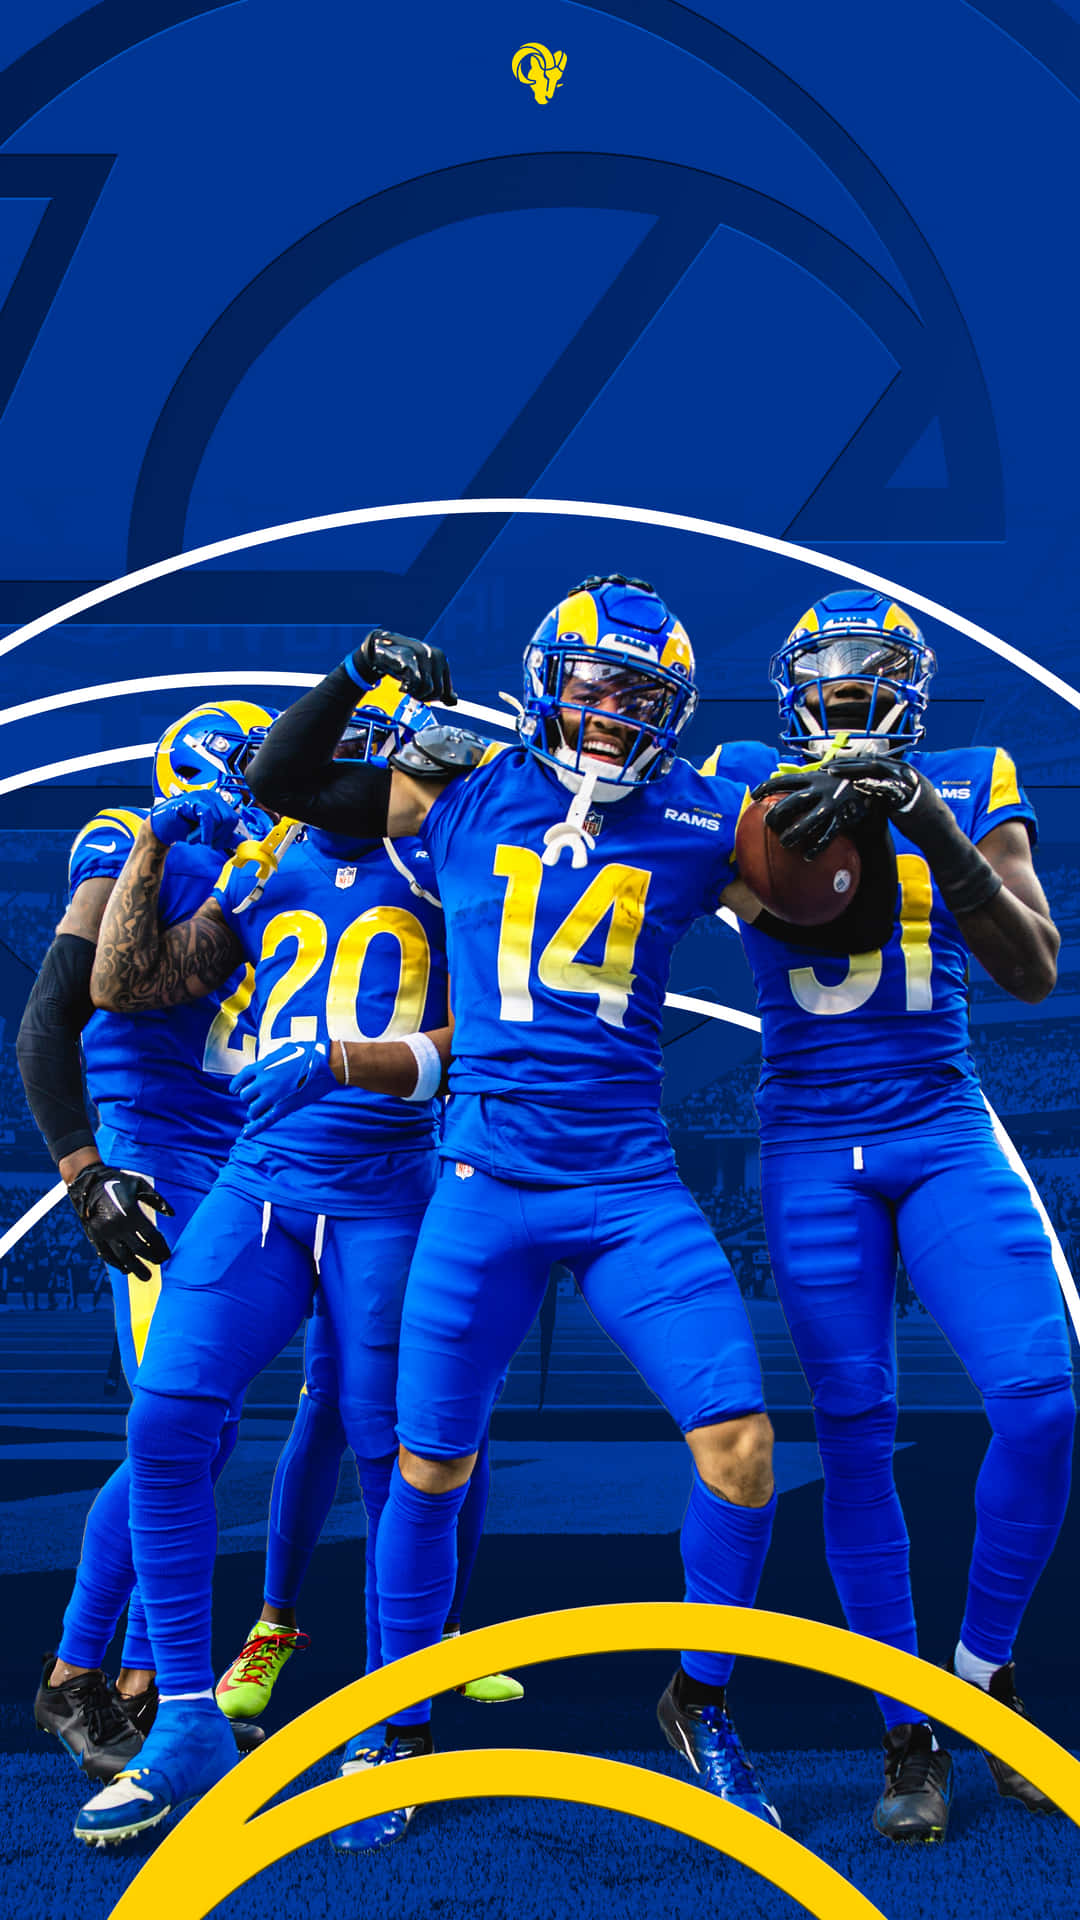 Get Ready for the Big Game with Cool Rams Wallpaper